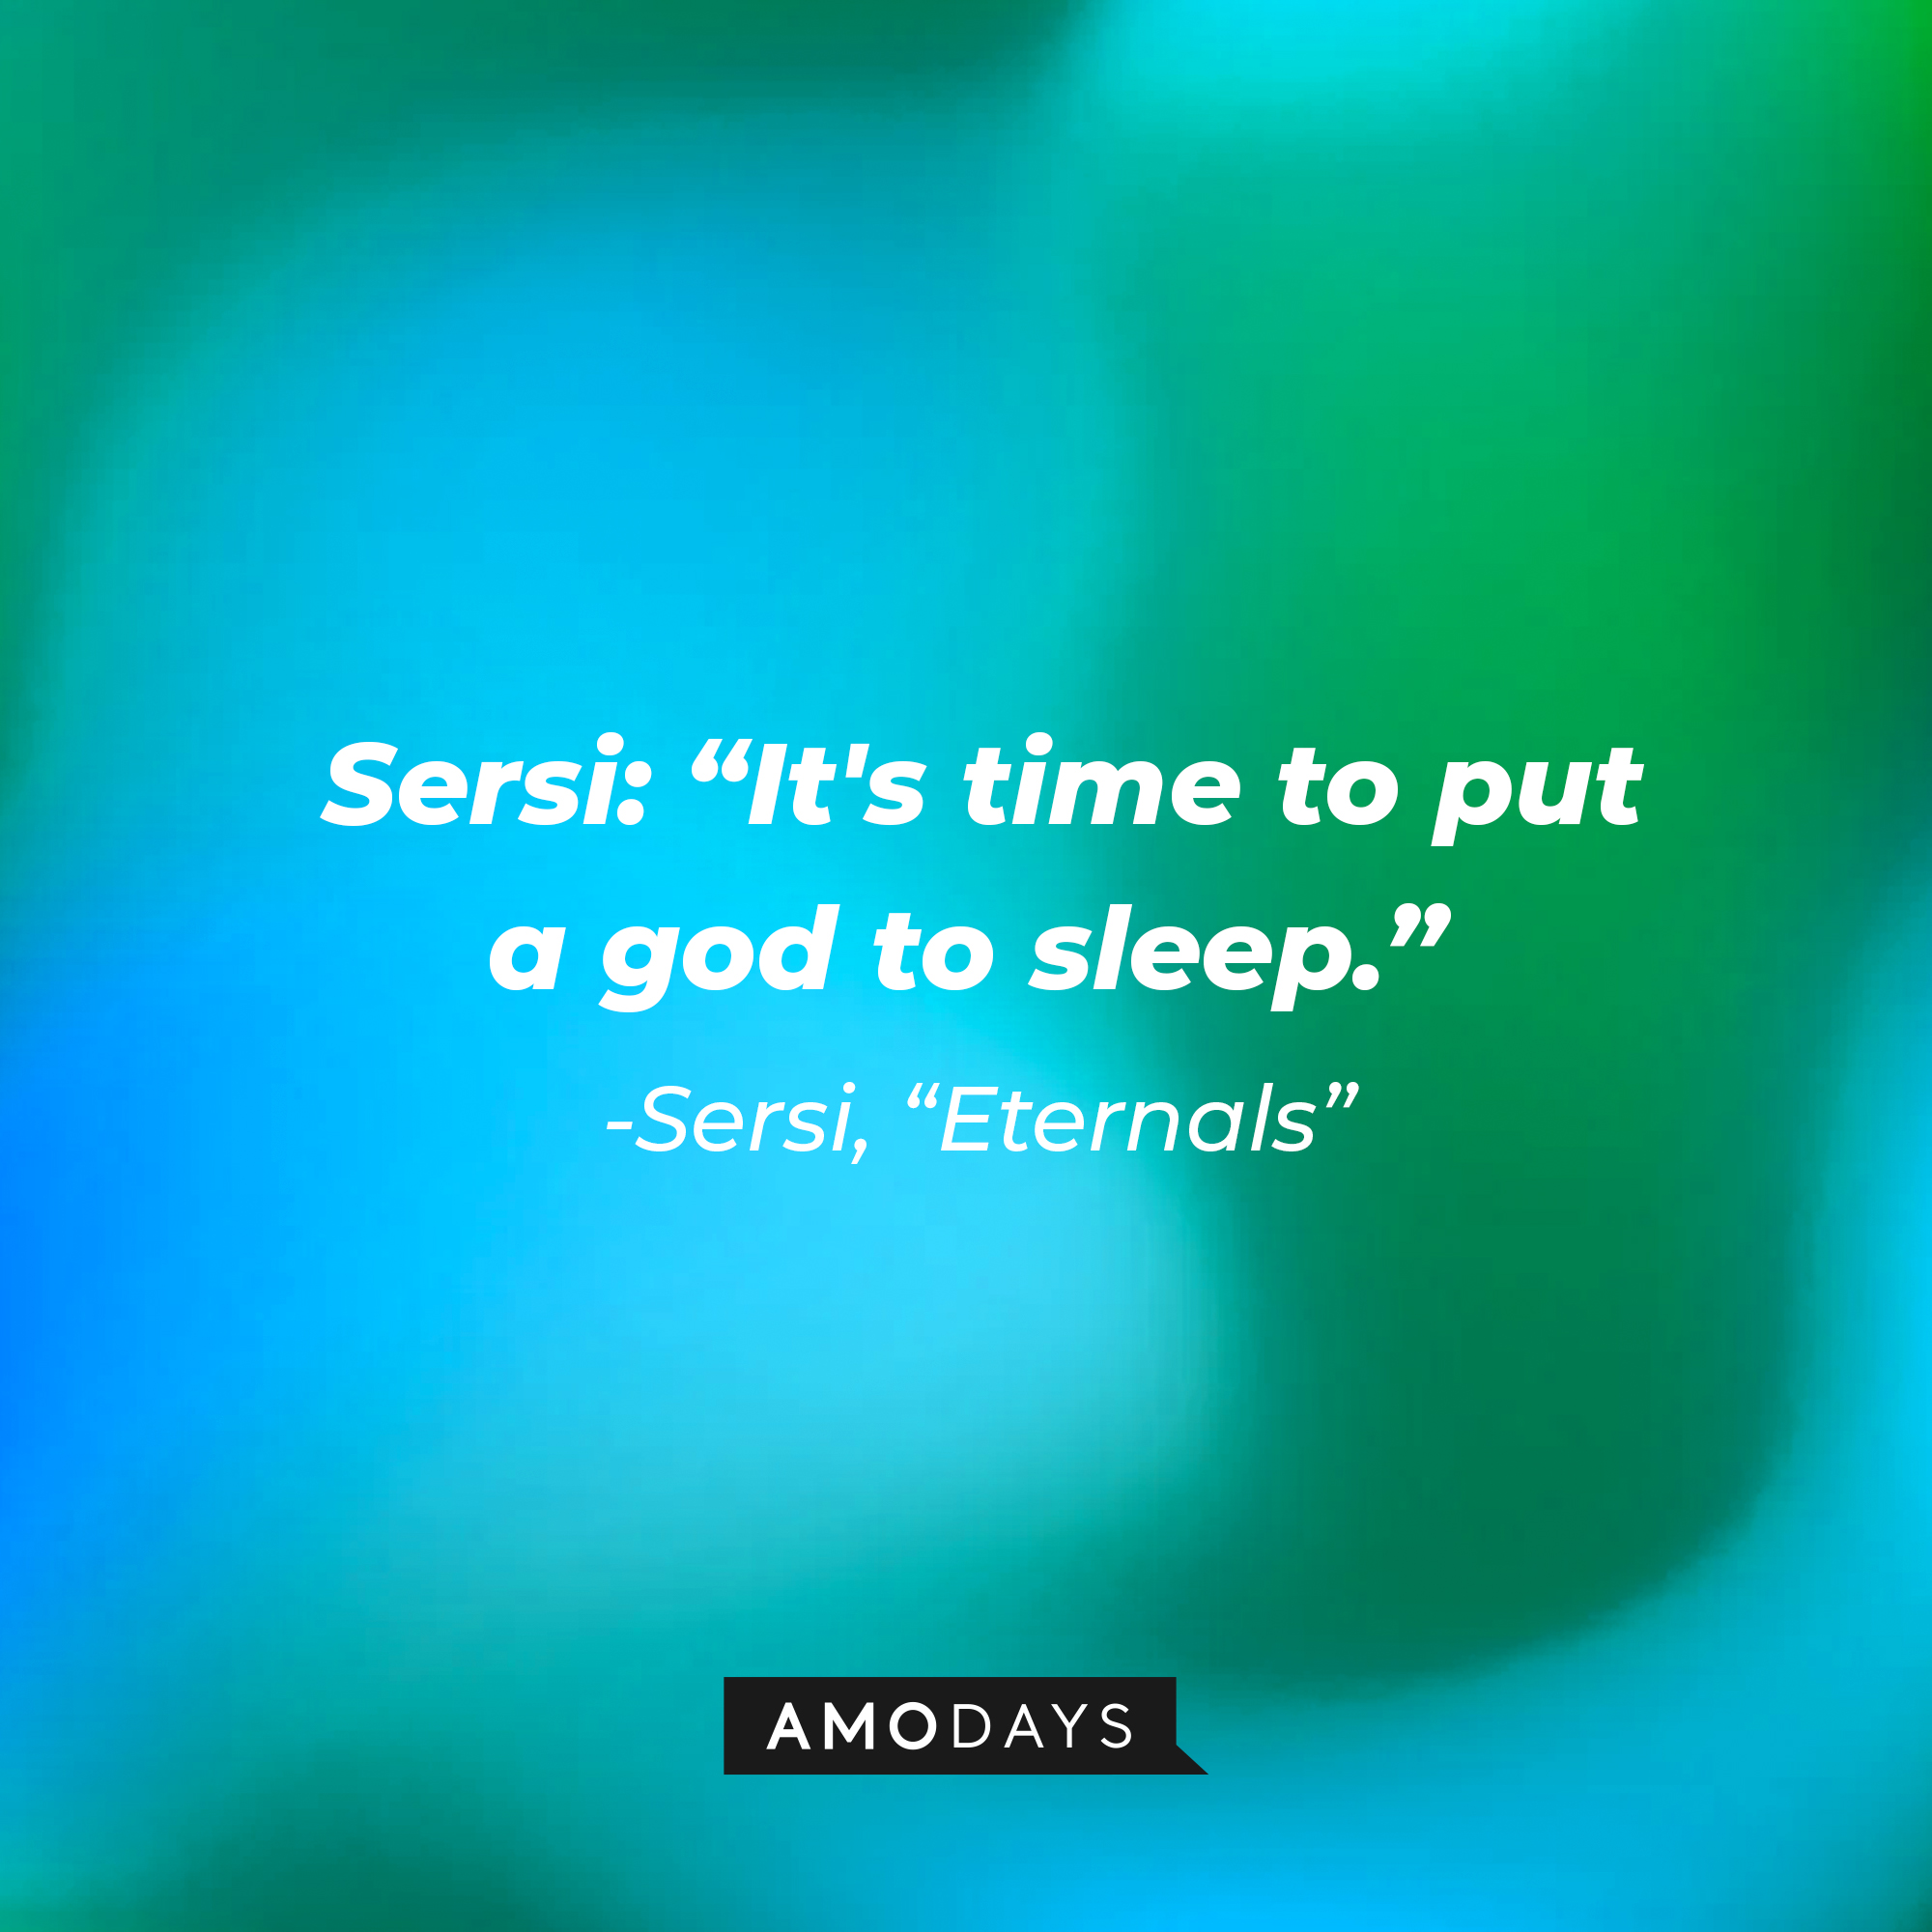 Sersi’s quote: "It's time to put a god to sleep." | Image: AmoDays